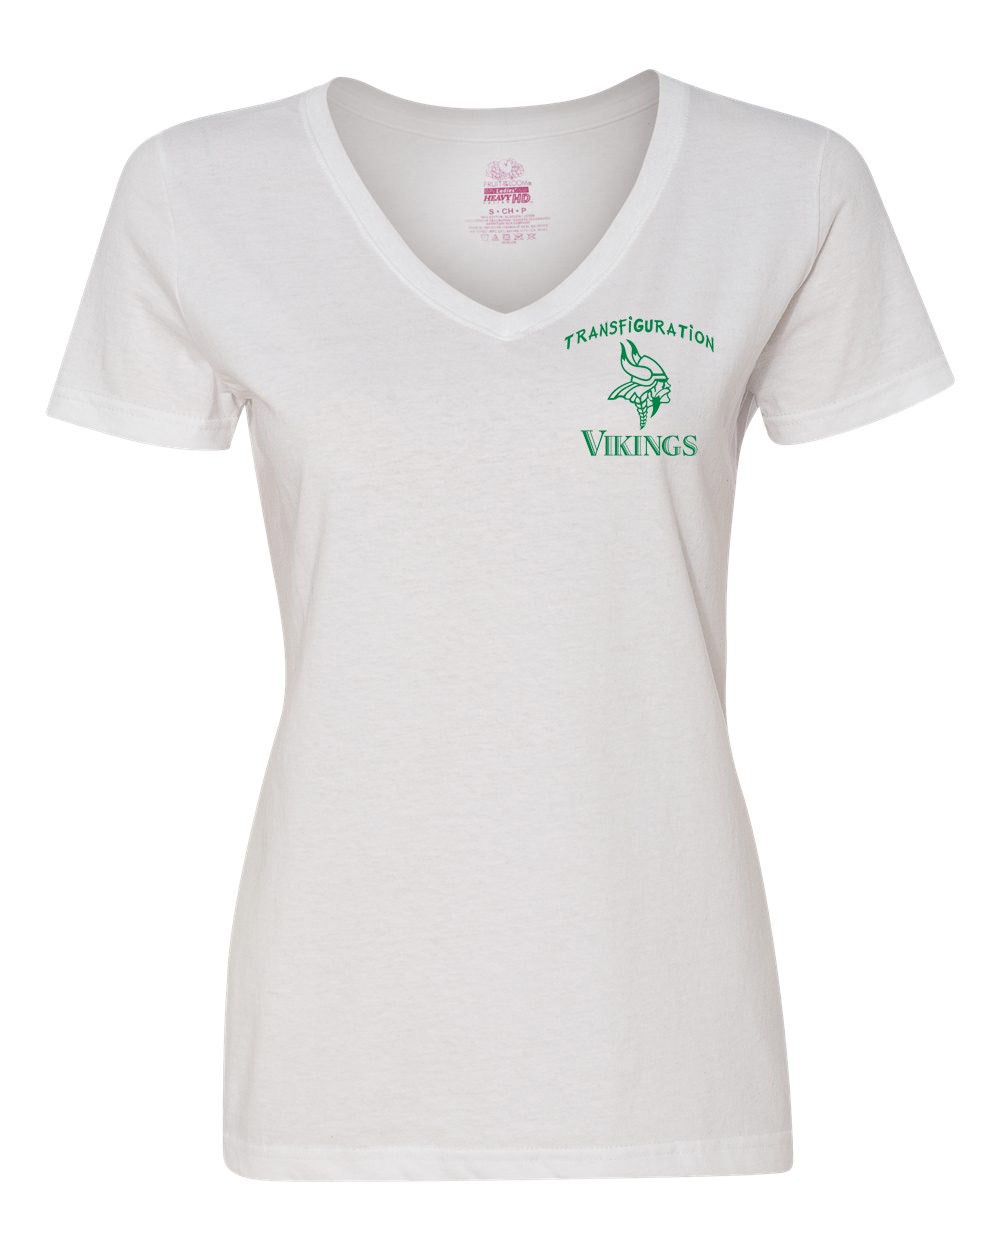 STAFF Transfiguration Women's V-Neck S/S T-Shirt w/ Logo - Please Allow 2-3 Weeks for Delivery